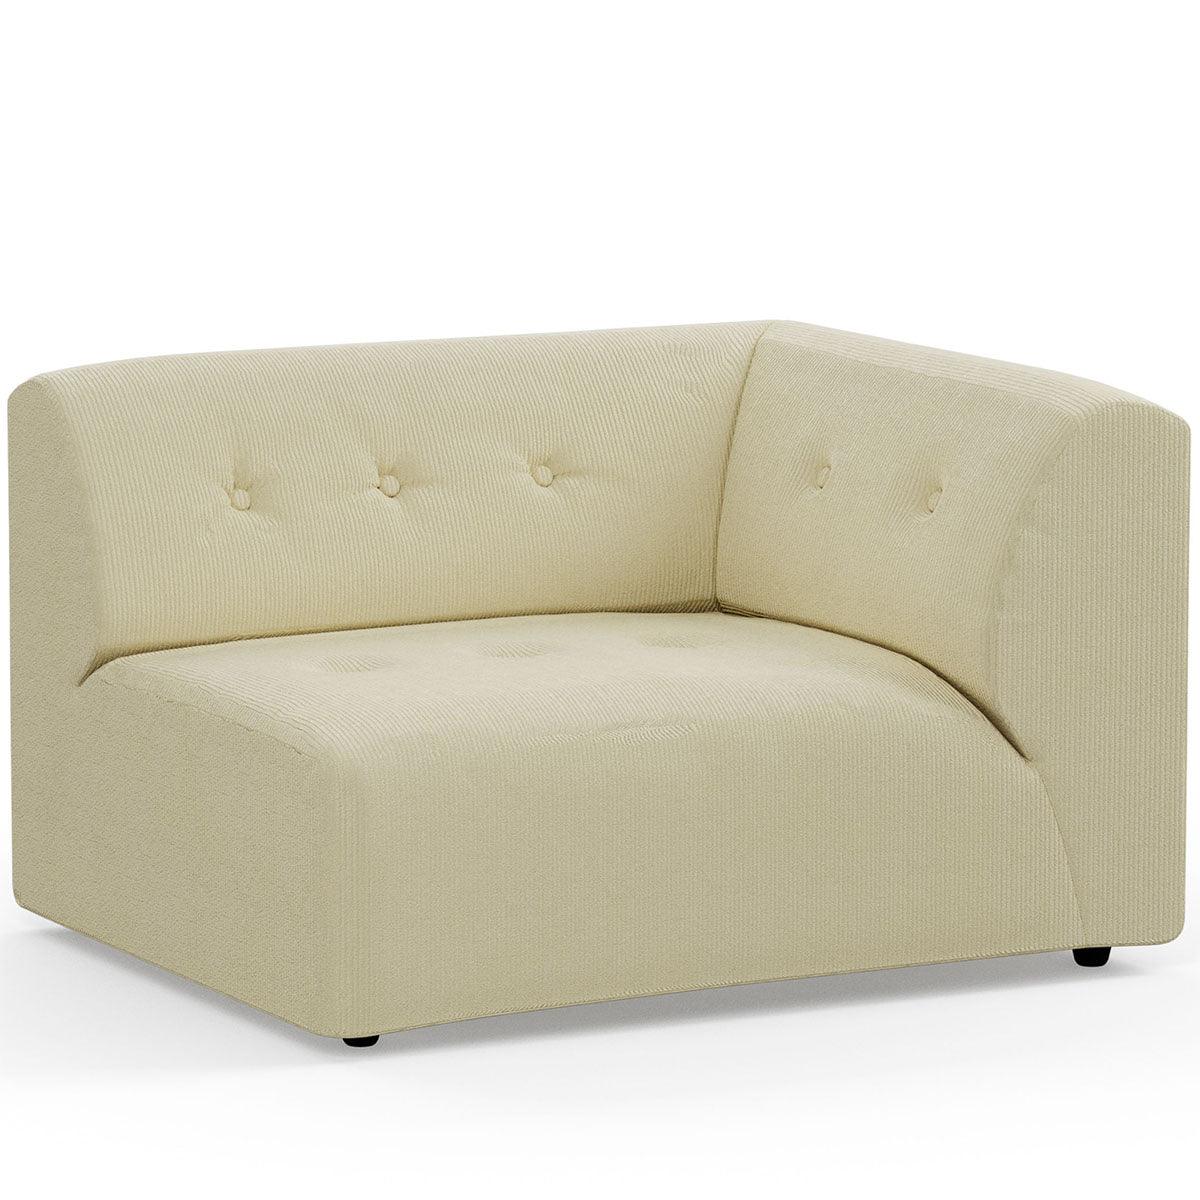 Vint Corduroy Rib Couch - Element Right 1.5-Seat - WOO .Design